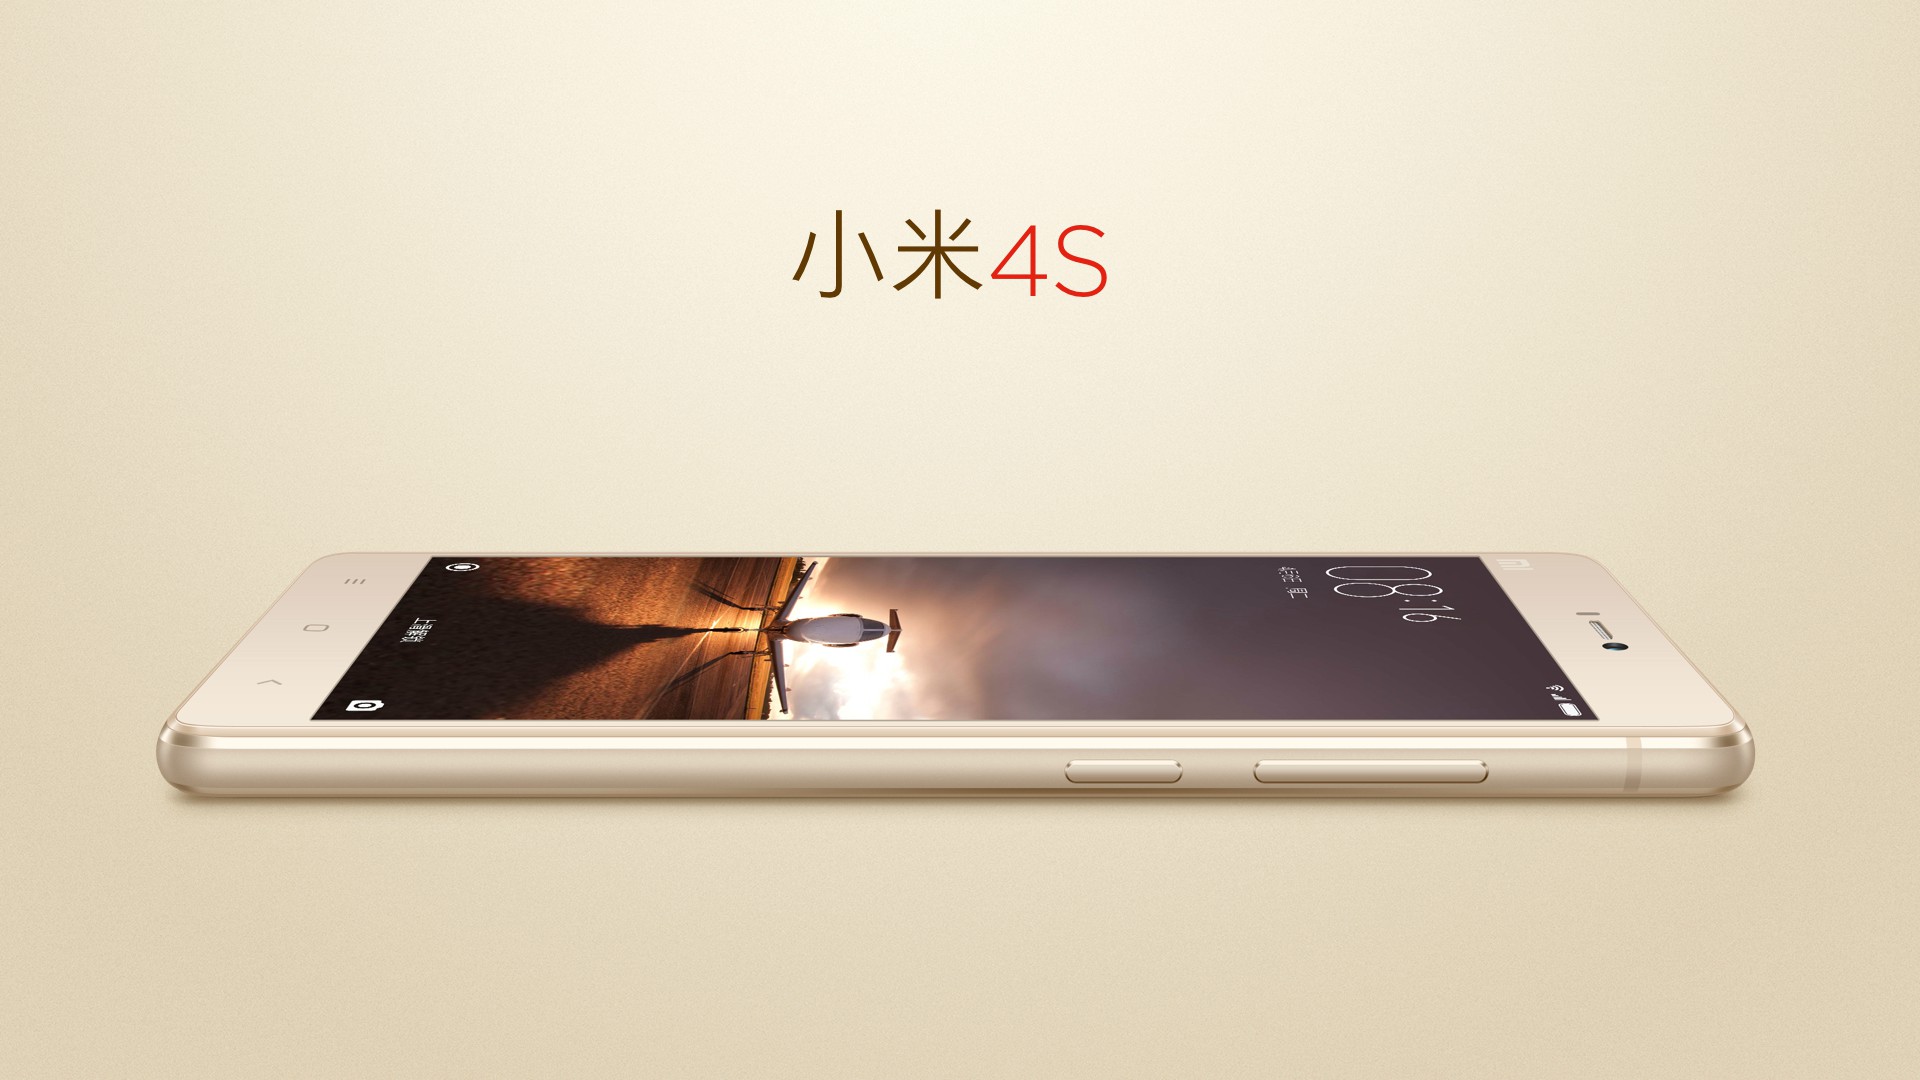 Xiaomi&#039;s latest mid-range phone is a sequel to the popular Mi 4